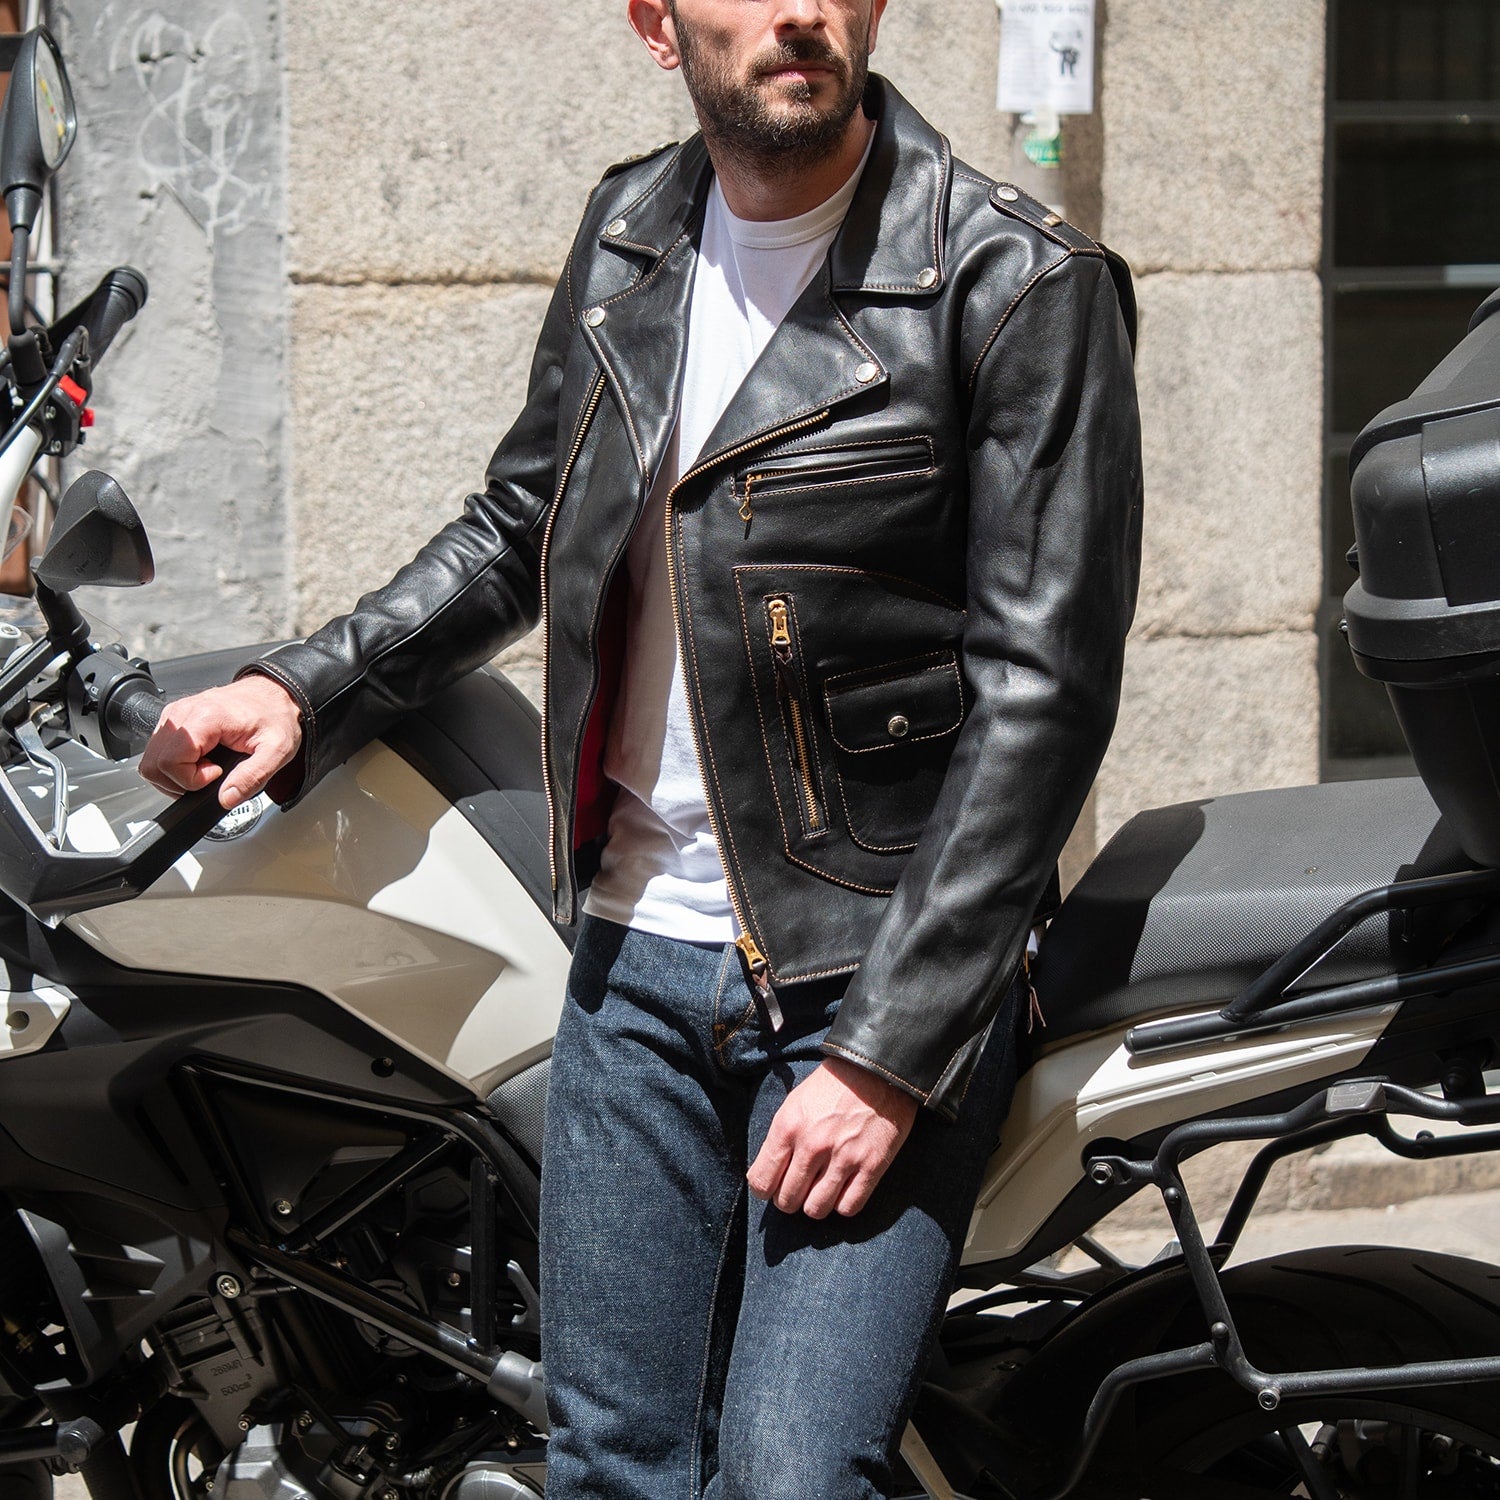 The Flat Head leather jacket